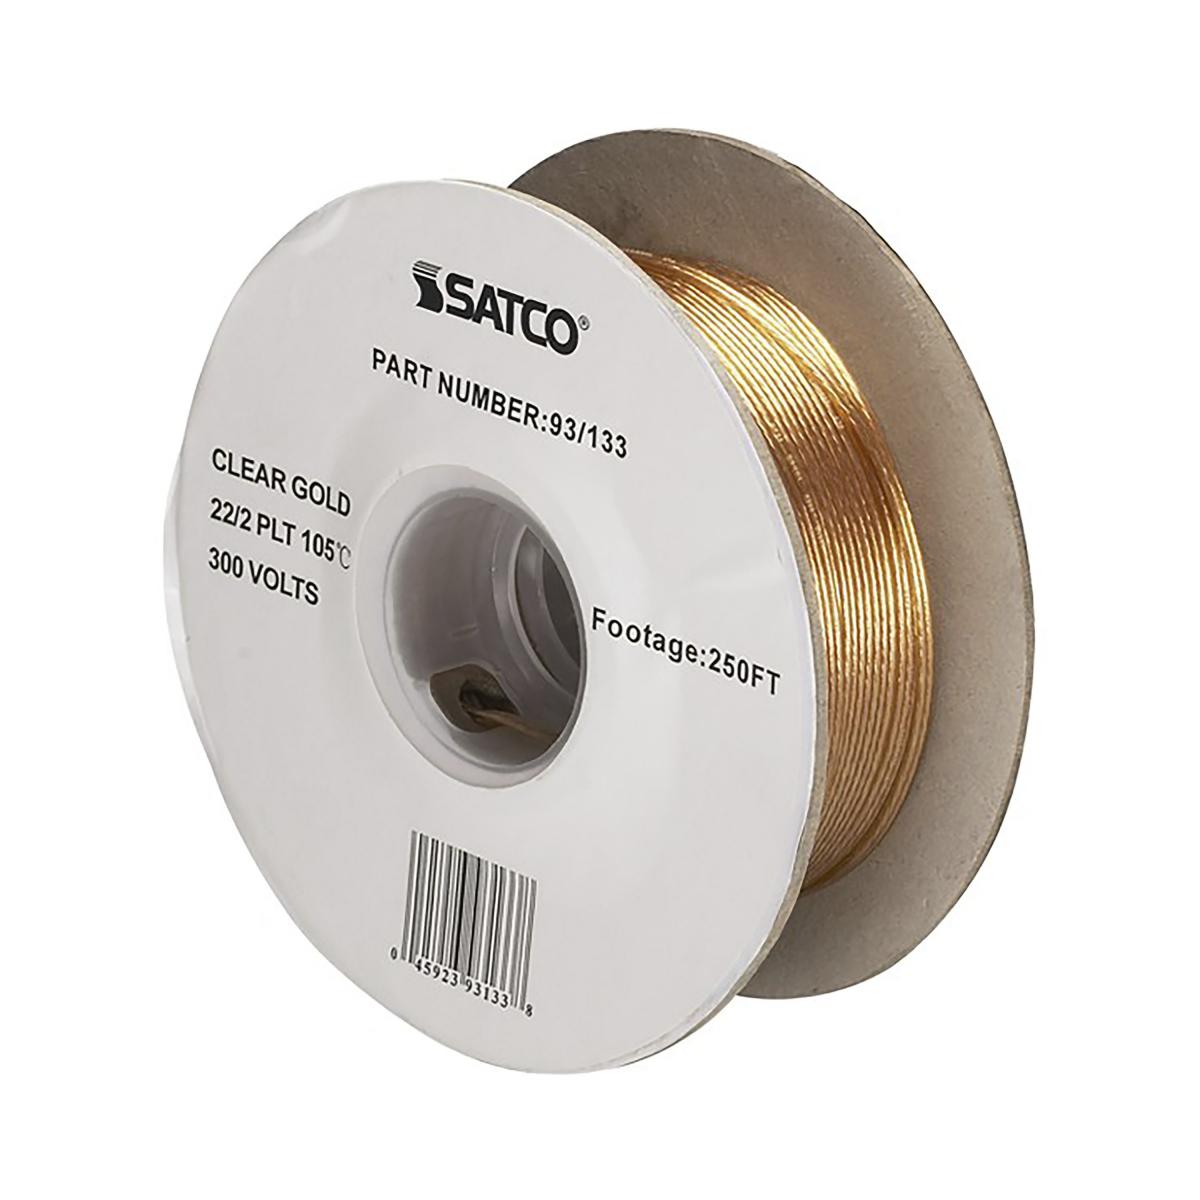 Satco 93-133 Lamp And Lighting Bulk Wire 22/2 SPT-1 105C Wire 250 Foot/Spool Clear Gold